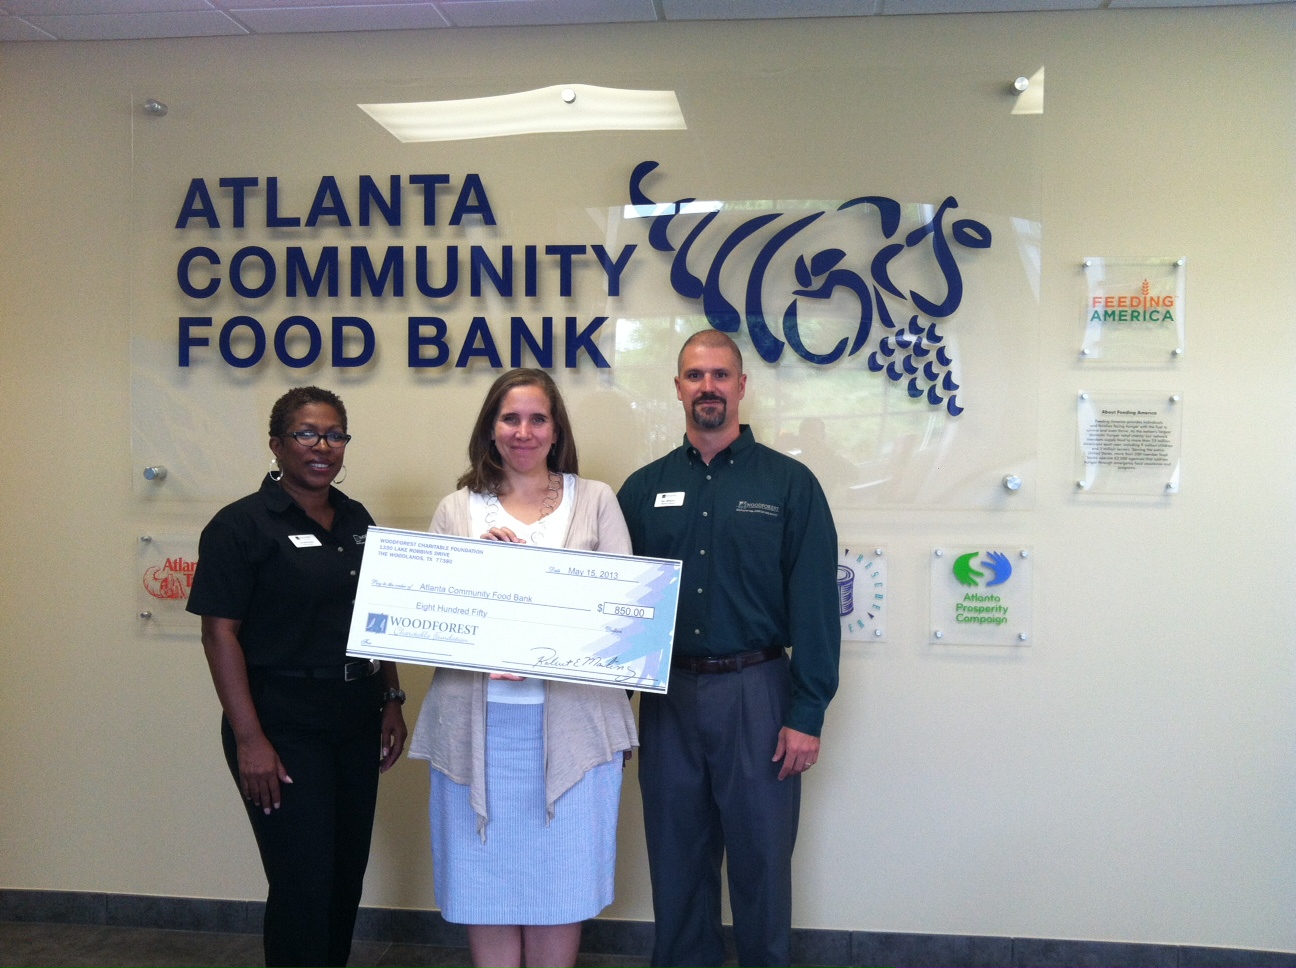 Atlanta Community Food Bank Receives $850 donation from Woodforest Charitable Foundation.